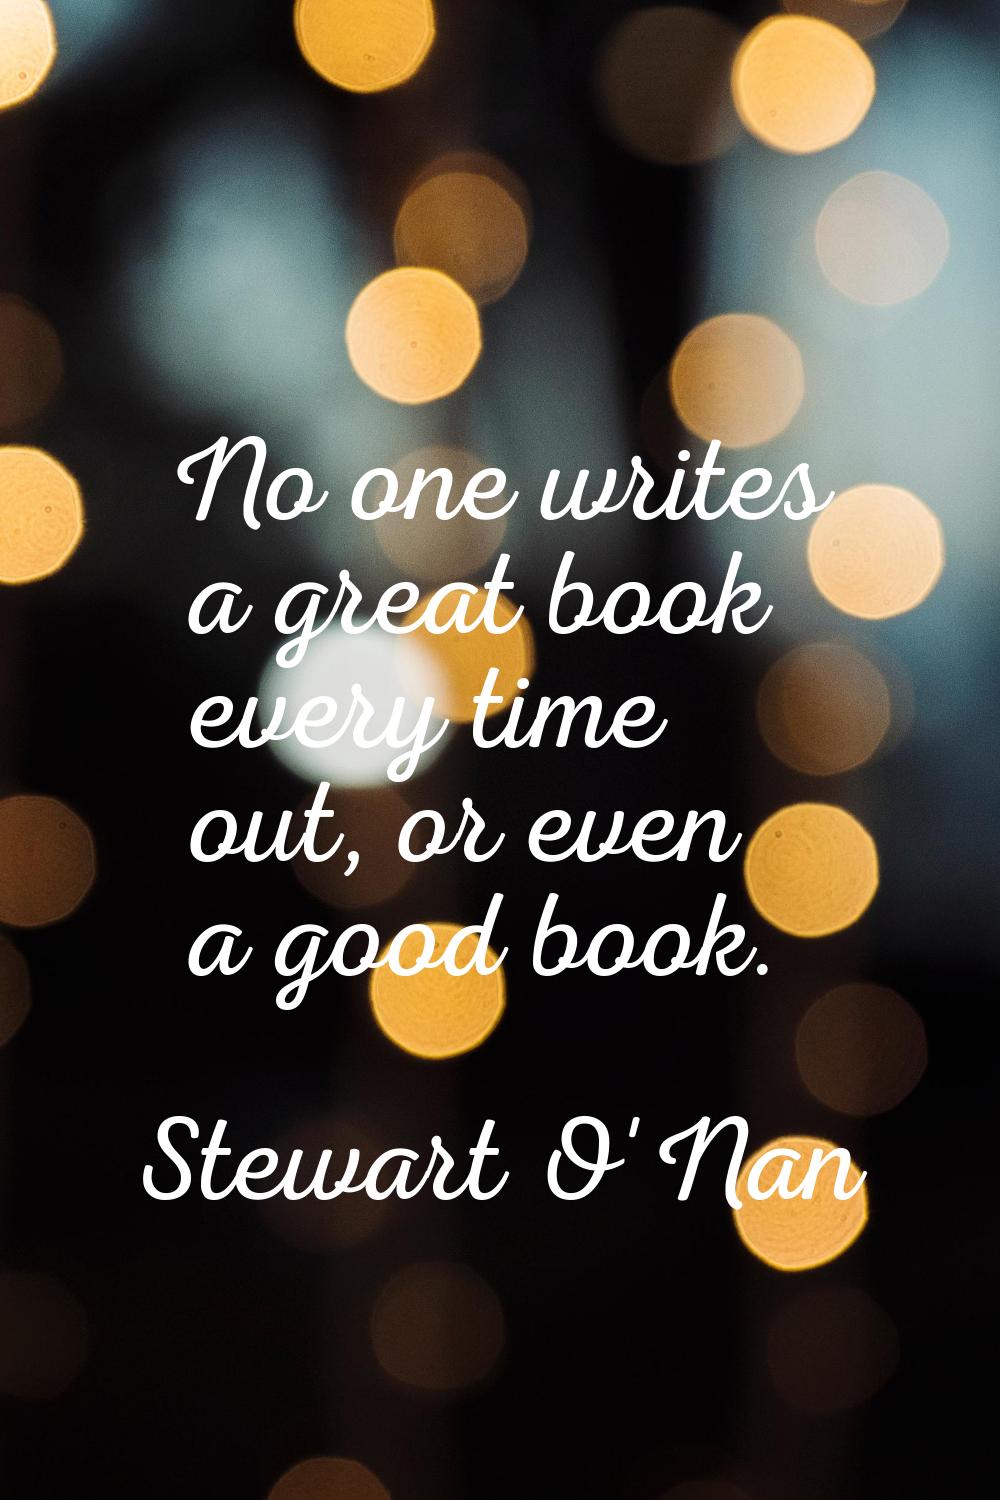 No one writes a great book every time out, or even a good book.